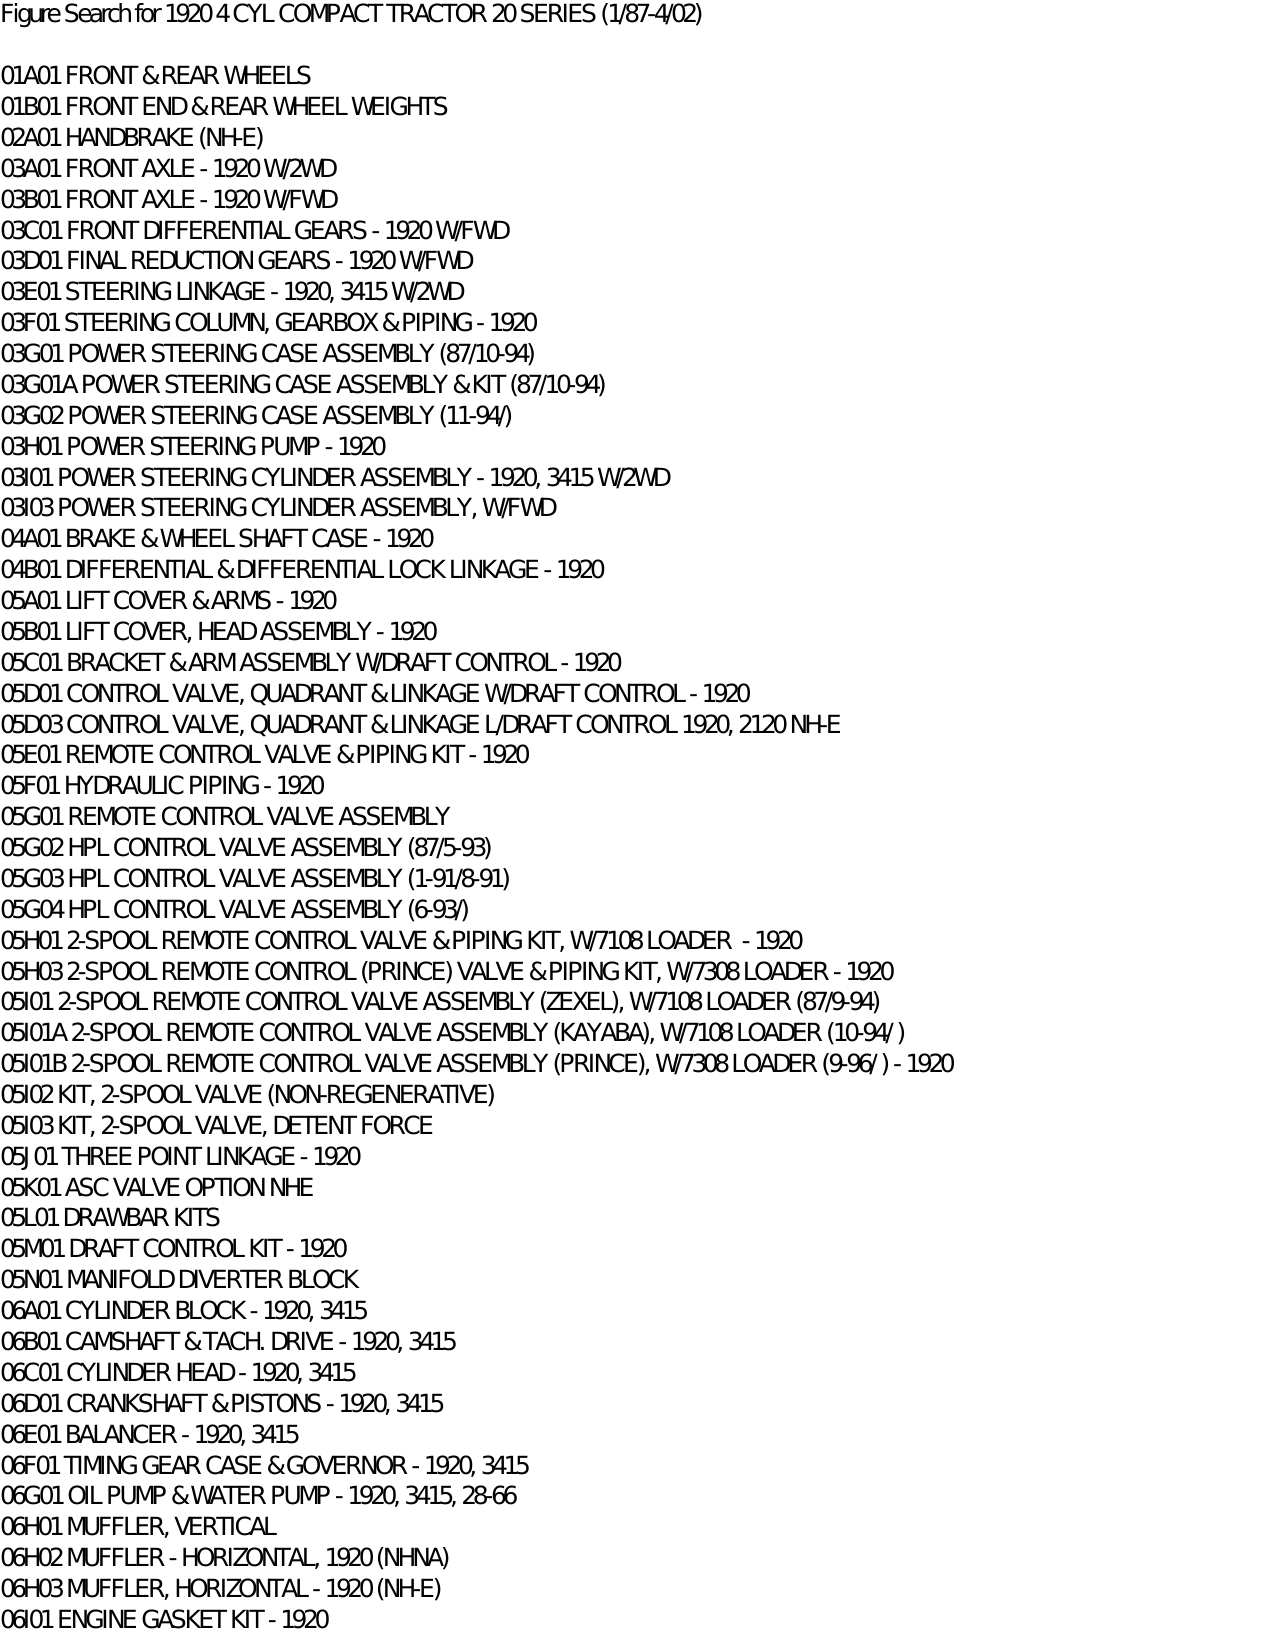 Ford 1920 compact tractor parts list Preview image 3